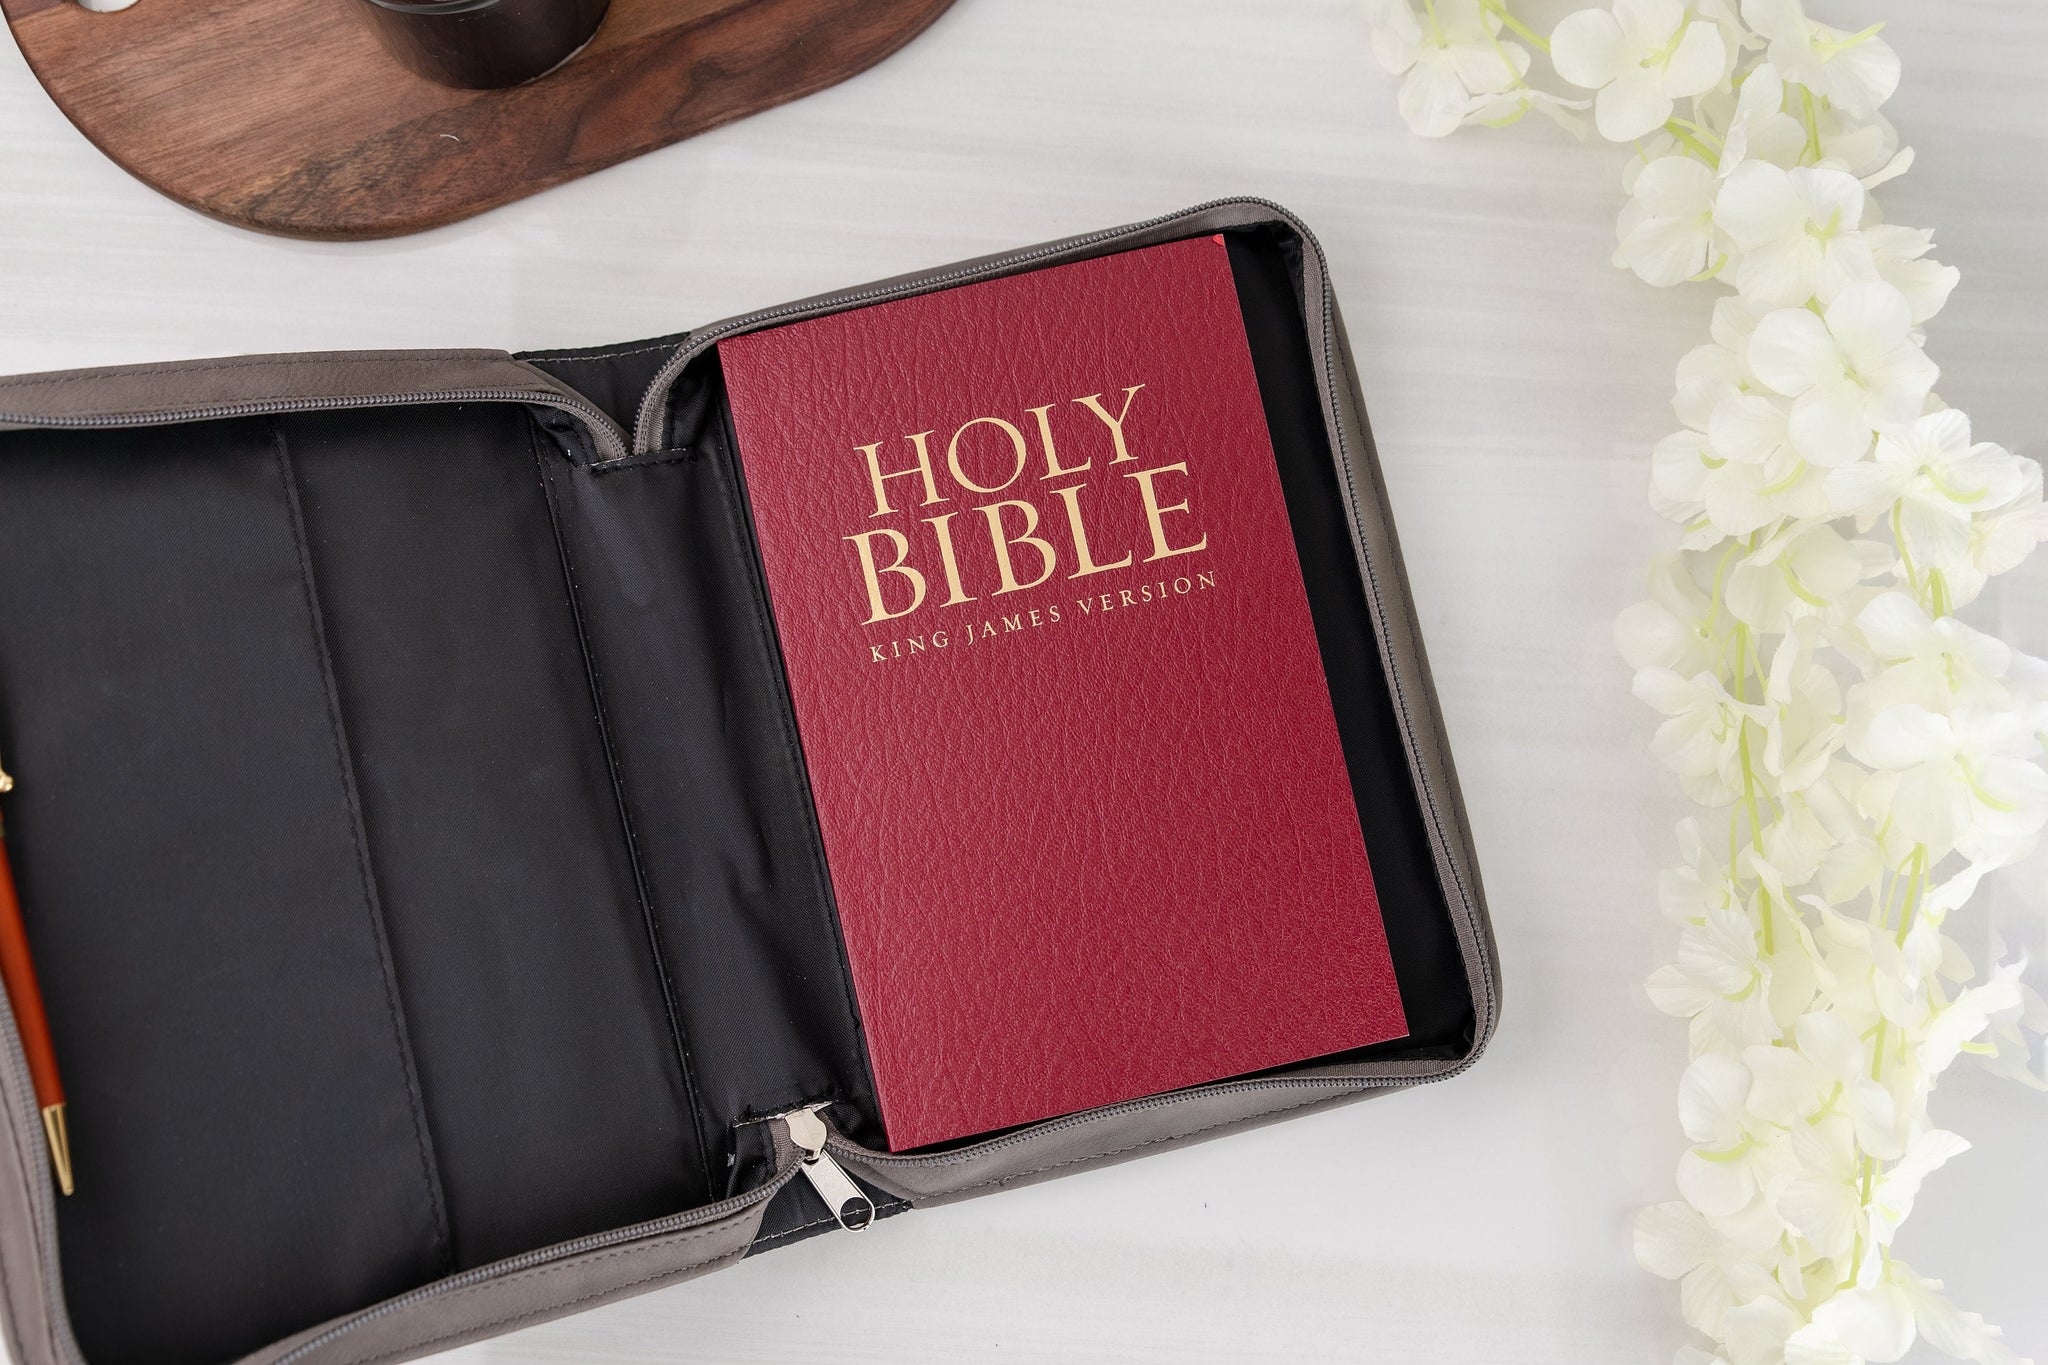 Personalized Leather Bible Cover, Custom Baptism Gift, Customized Engraved Cover, Bible Case, Christian Gift, Vegan Leather Bible Protector